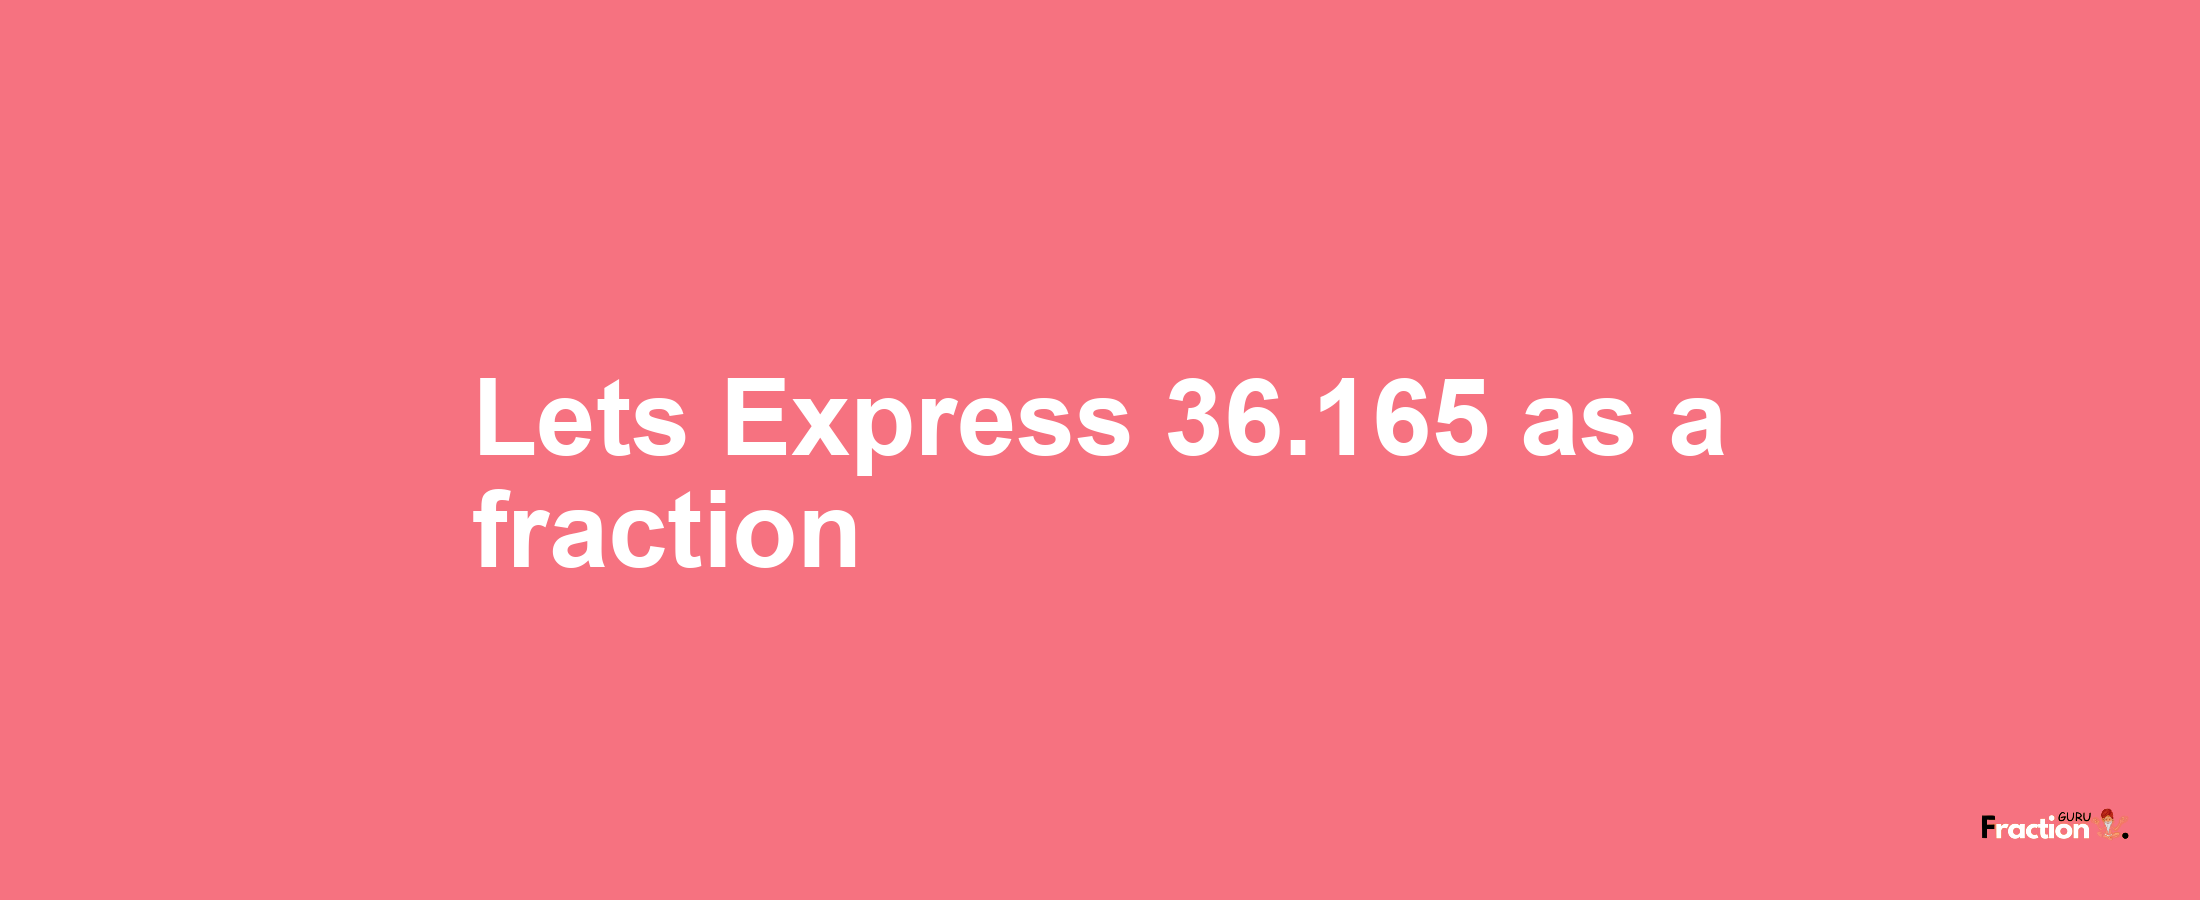 Lets Express 36.165 as afraction